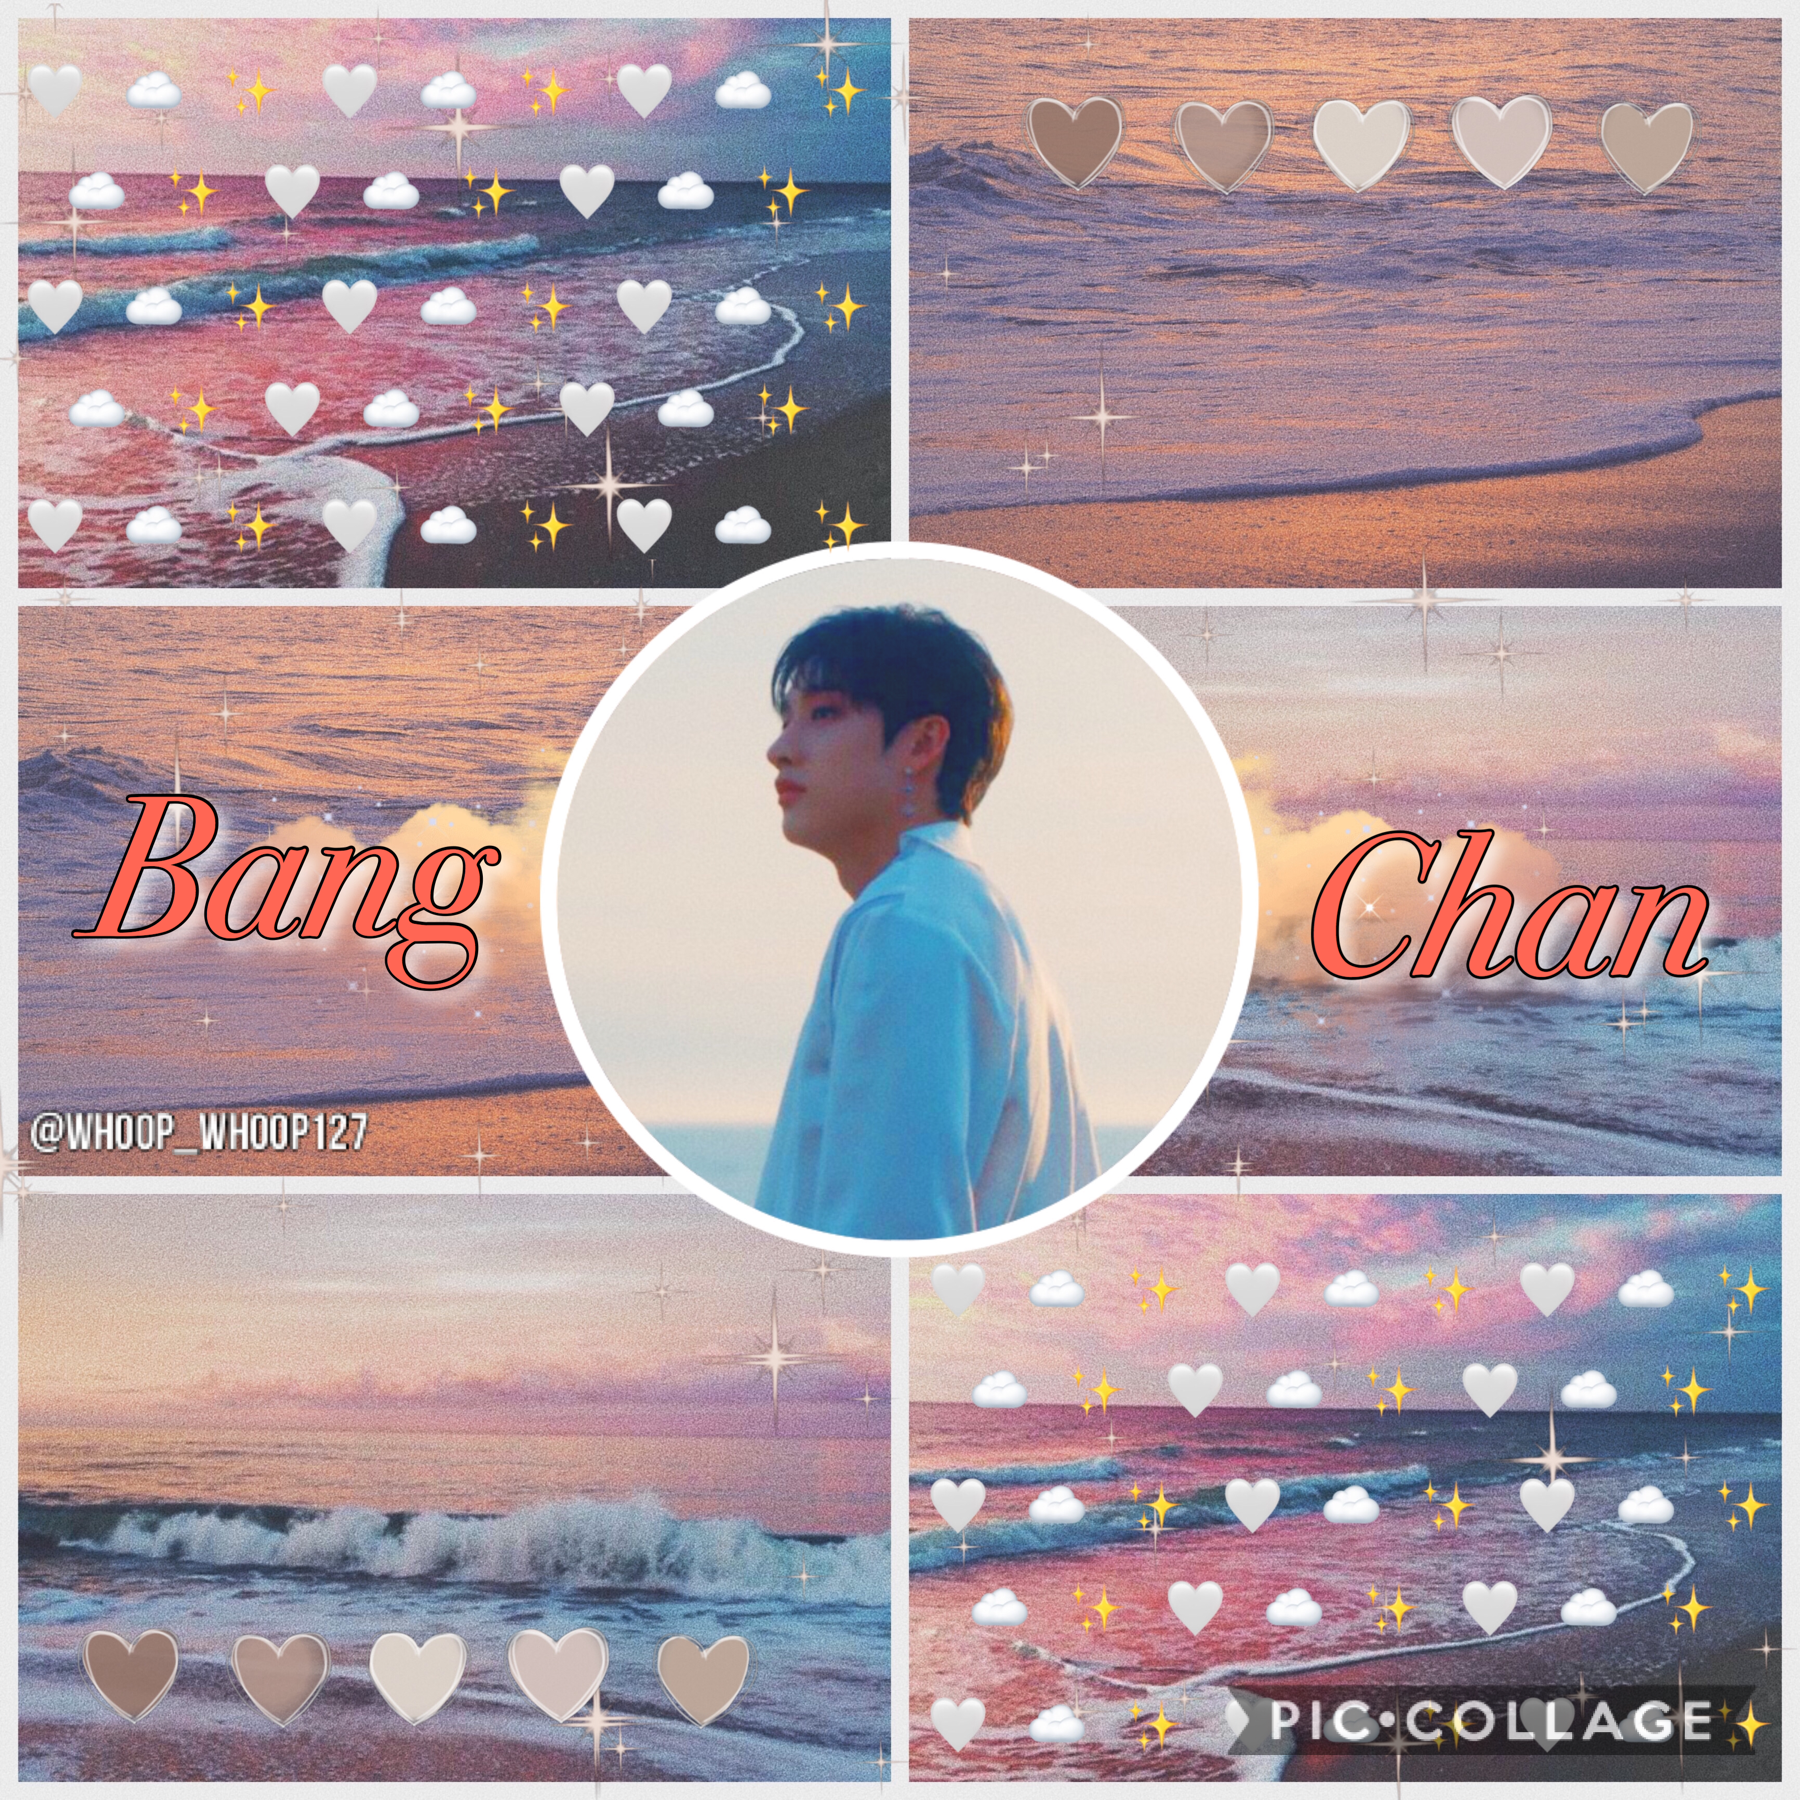 •🚒•
🌻Chan~Stray Kids🌻
Ahh it’s been so long since I’ve posted lmaoo I have like 3 aesthetics in my camera roll rn that need to be edited😭 Anyways ily all haha *mwah*